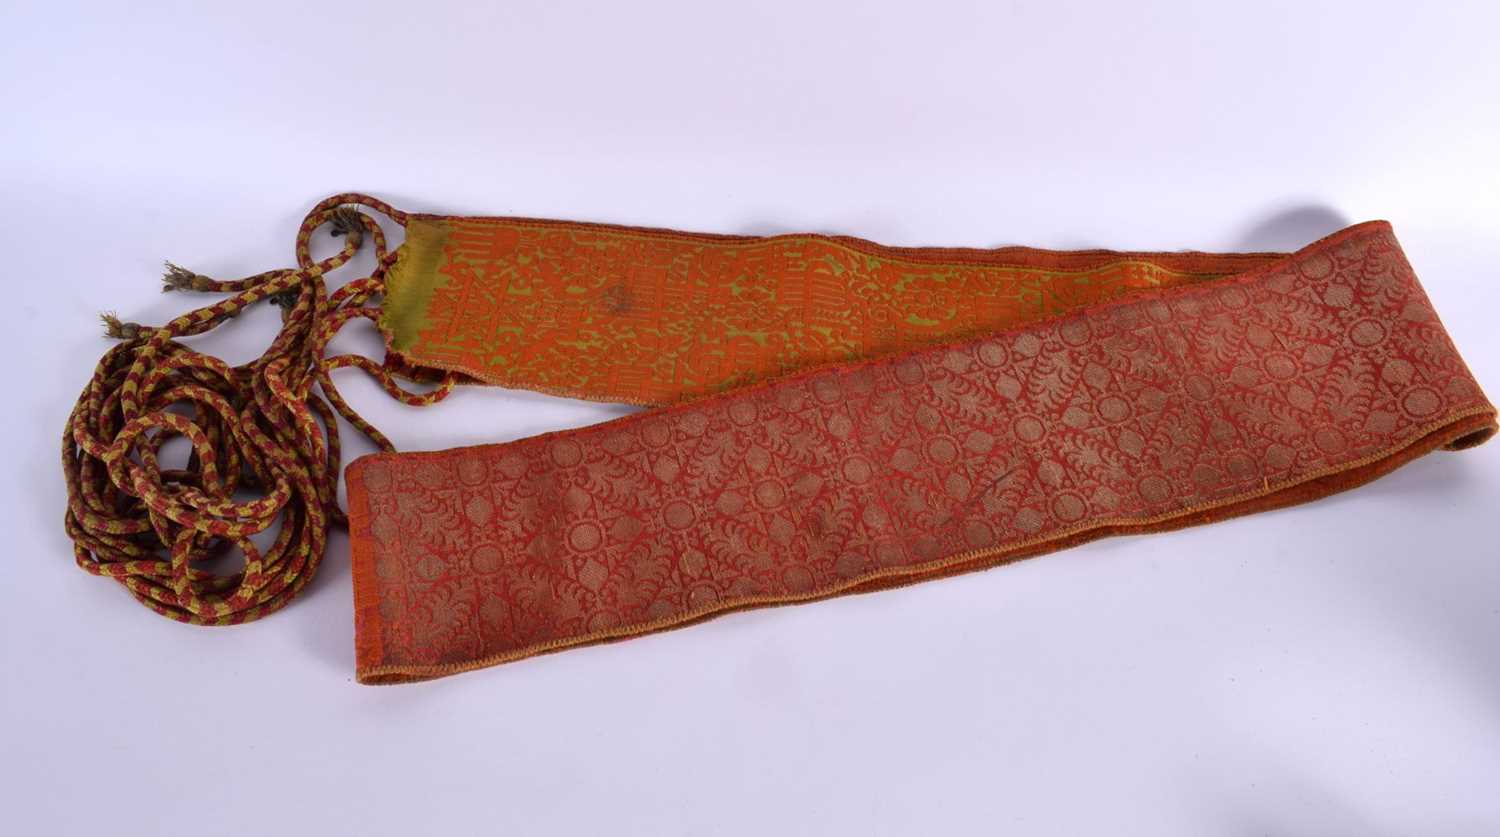 A 19TH CENTURY TURKISH ORANGE AND RED SILK EMBROIDERED BELT decorated with gold motifs. 280 cm